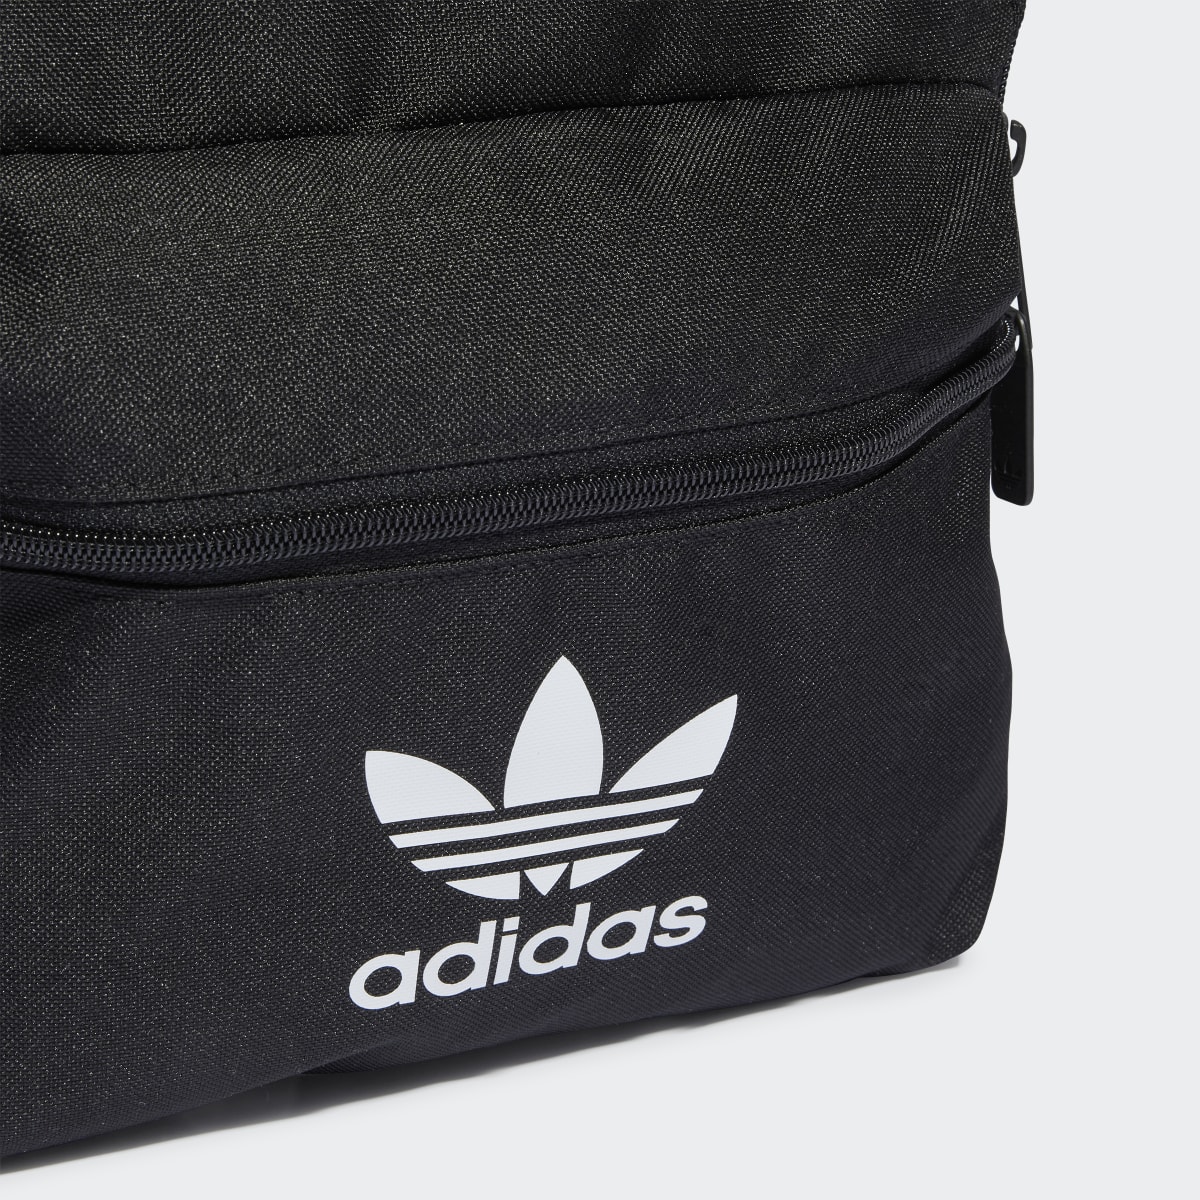 Adidas Small Adicolor Classic Backpack. 7